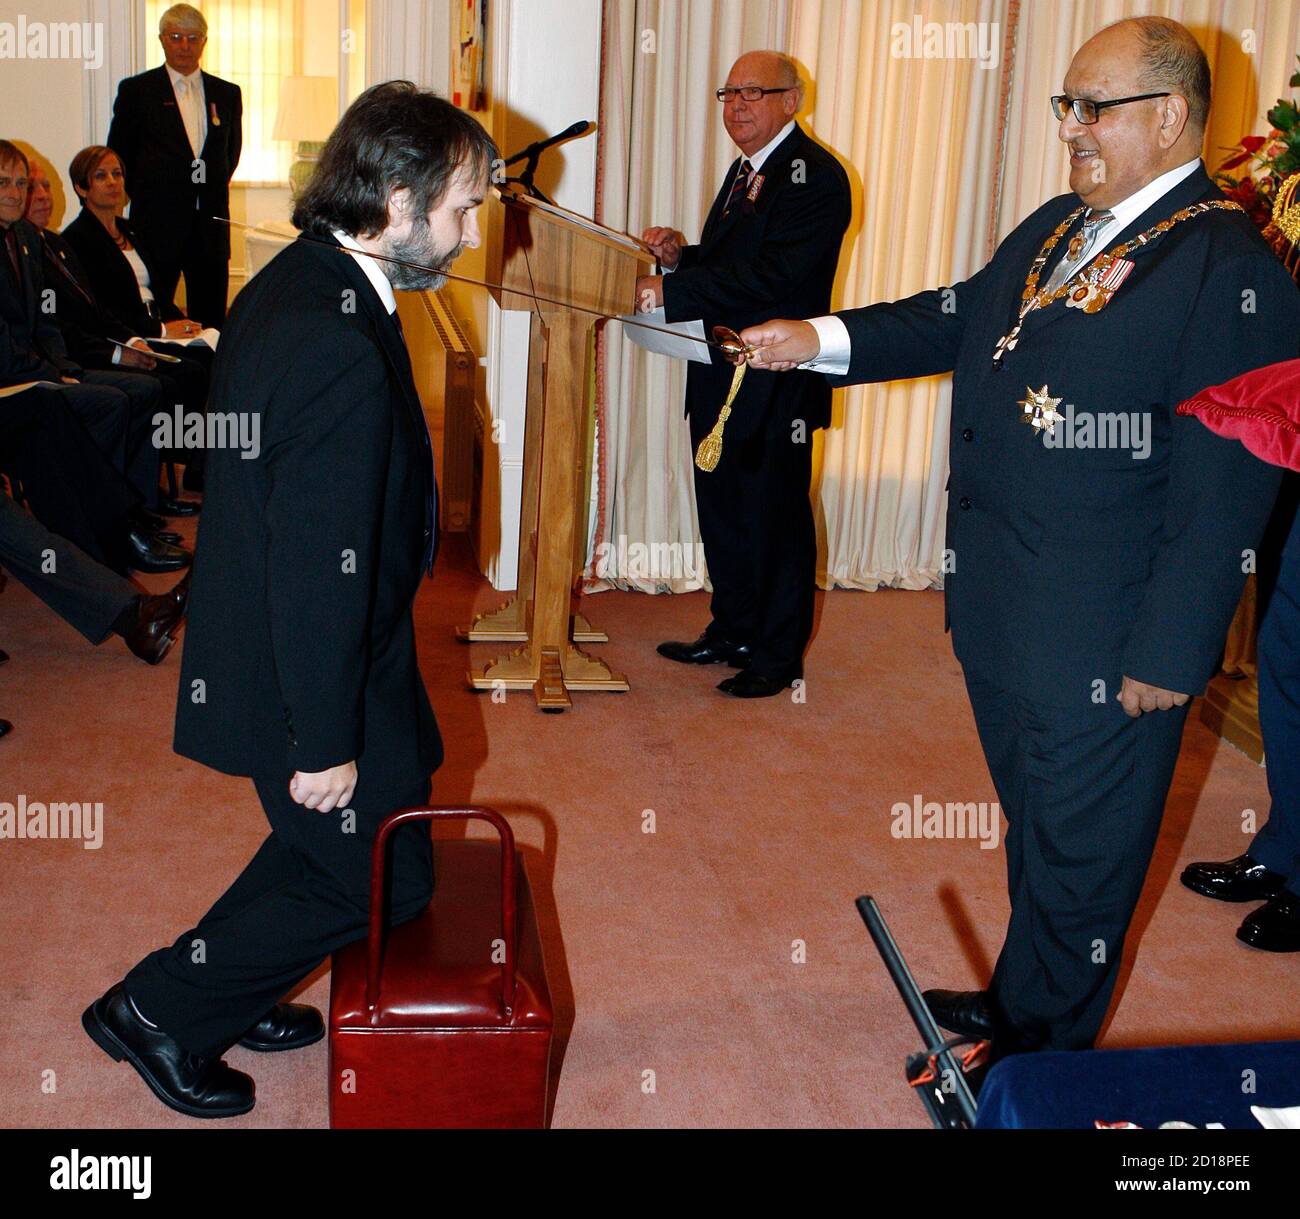 Director Peter Jackson (L) of New Zealand is knighted by New Zealand's Governor-General Anand Satyanand at Premier House in Wellington April 28, 2010. Jackson who directed the 'Lord Of The Rings' trilogy, received the Knight Companion of the New Zealand Order of Merit, for services to the arts. REUTERS/Dominion Post/ Kent Blechynden/Pool (NEW ZEALAND - Tags: ENTERTAINMENT POLITICS) Stock Photo